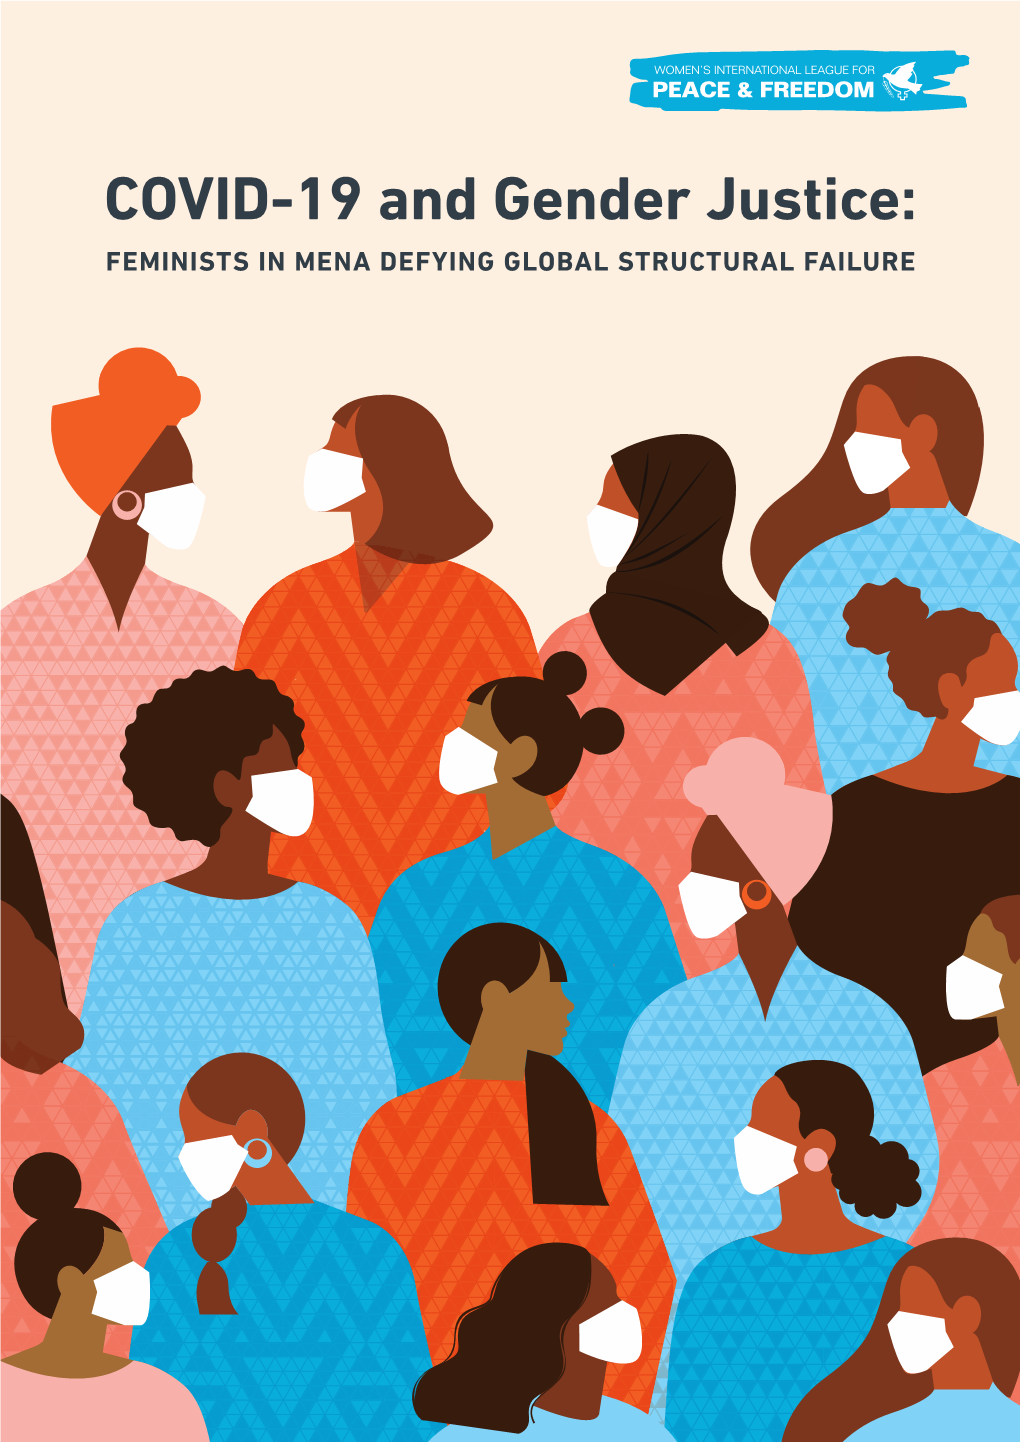 COVID-19 and Gender Justice: FEMINISTS in MENA DEFYING GLOBAL STRUCTURAL FAILURE COVID-19 and GENDER JUSTICE: FEMINISTS in MENA DEFYING GLOBAL STRUCTURAL FAILURE